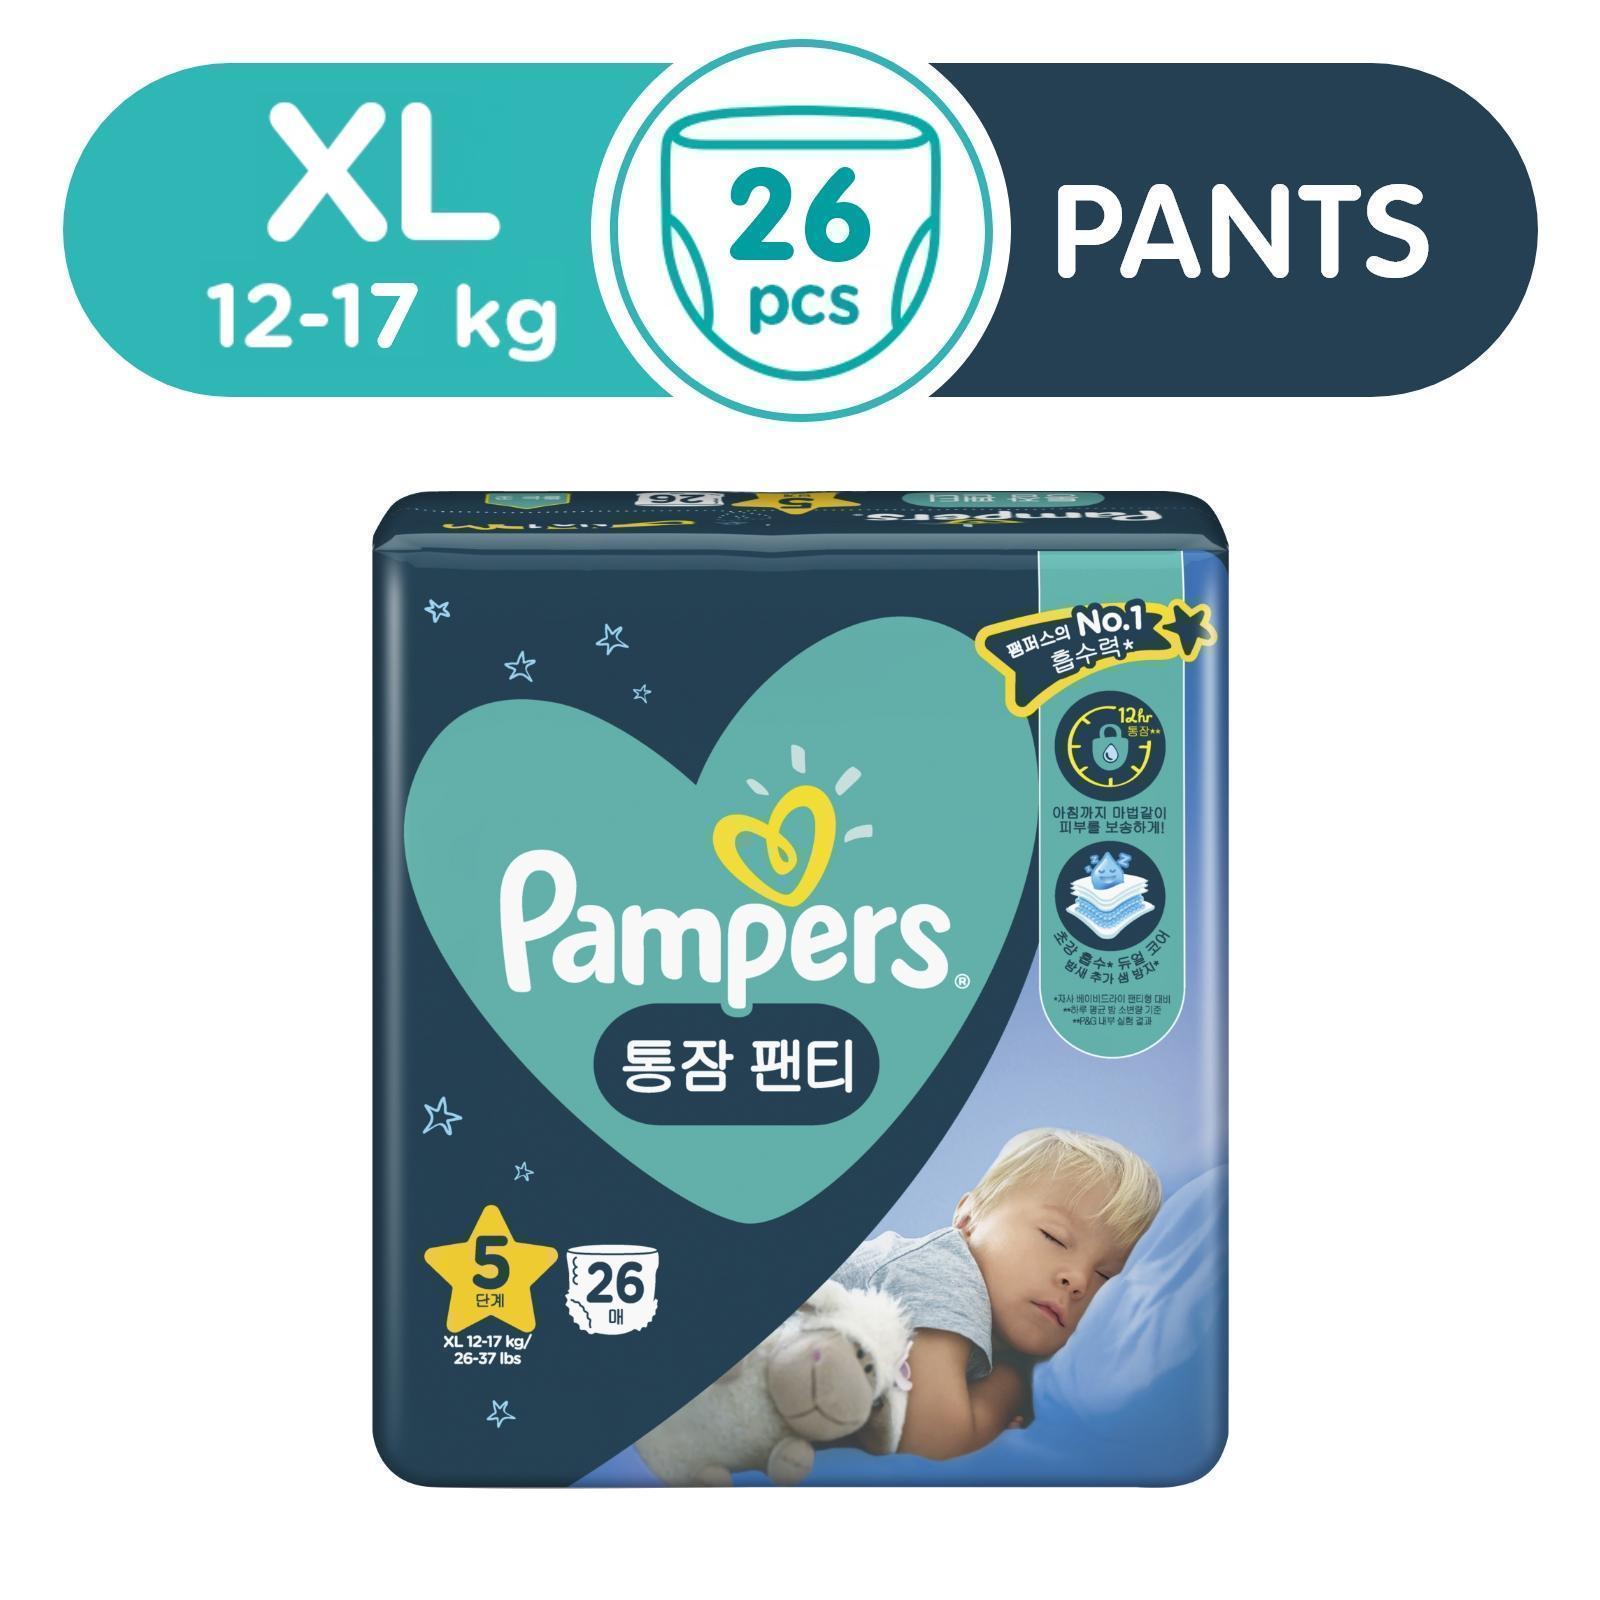 Pampers All-Round protection Diaper Pants XL, 66 Count – A-one SuperMarket